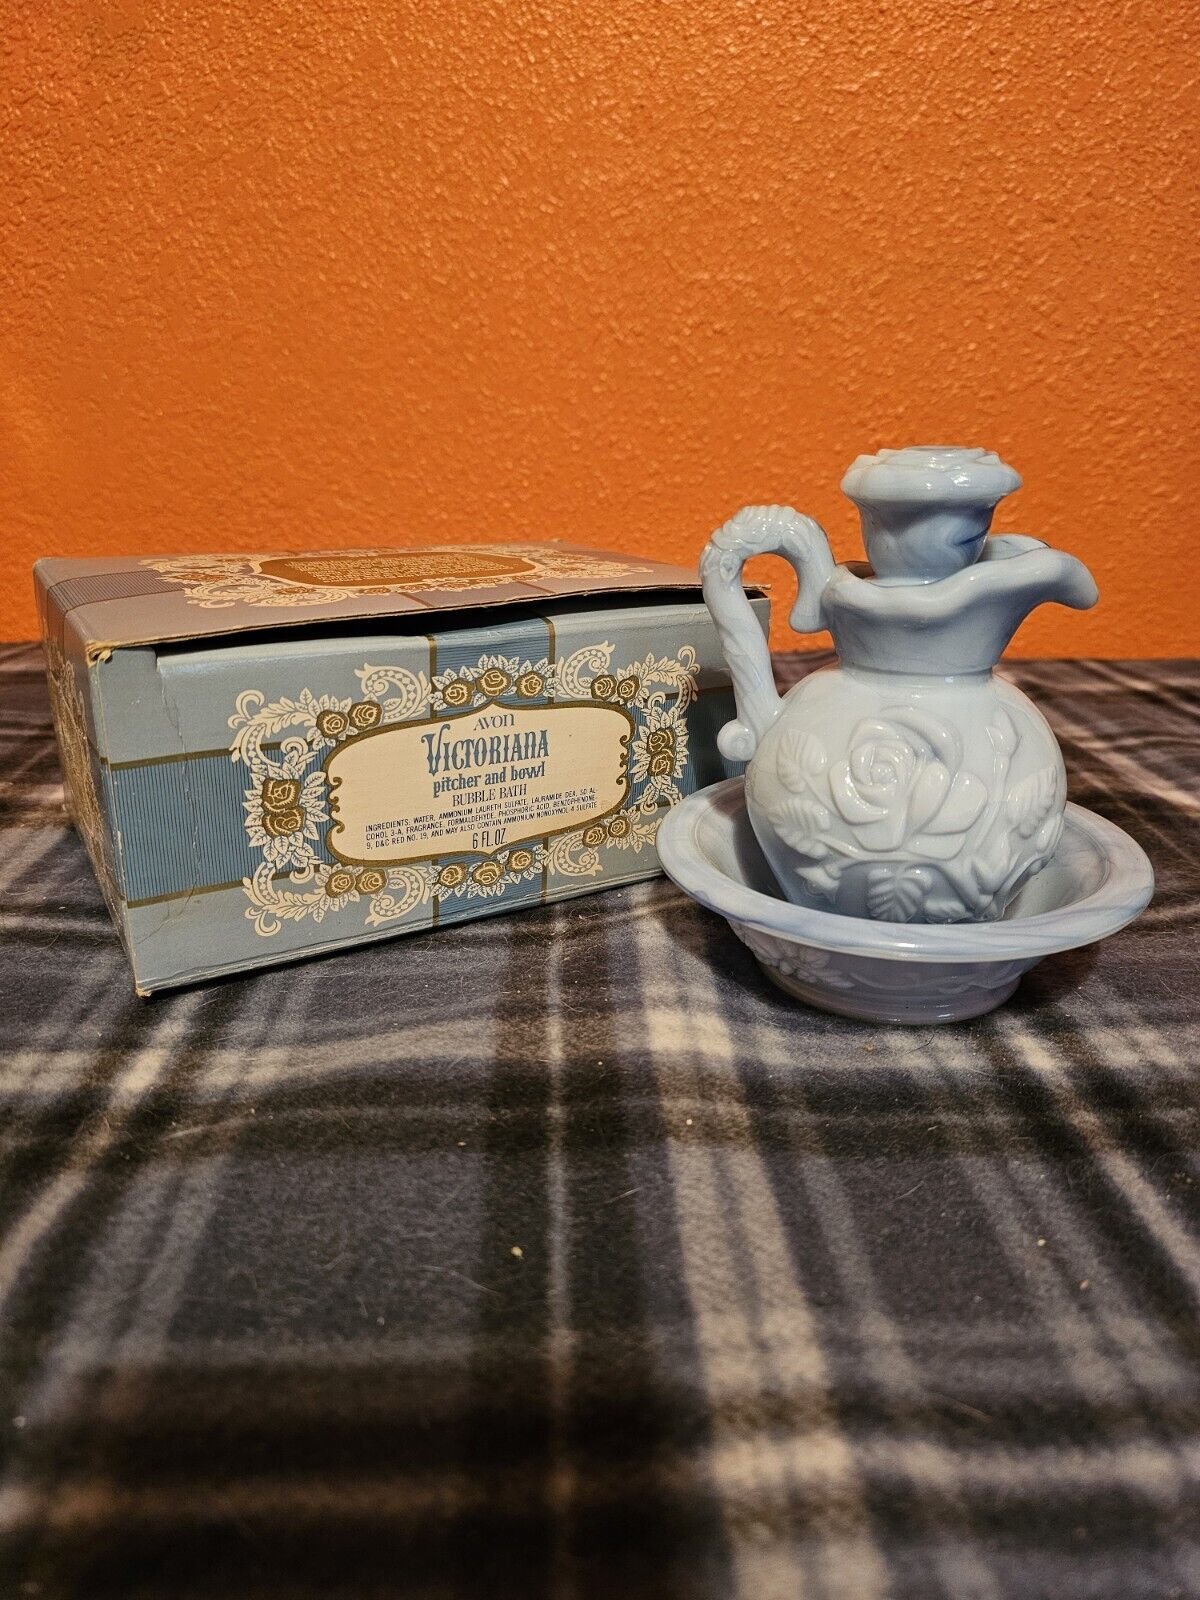 Vintage Avon Victoriana Pitcher and Bowl Set Blue Bubble Bath New In Box 1978